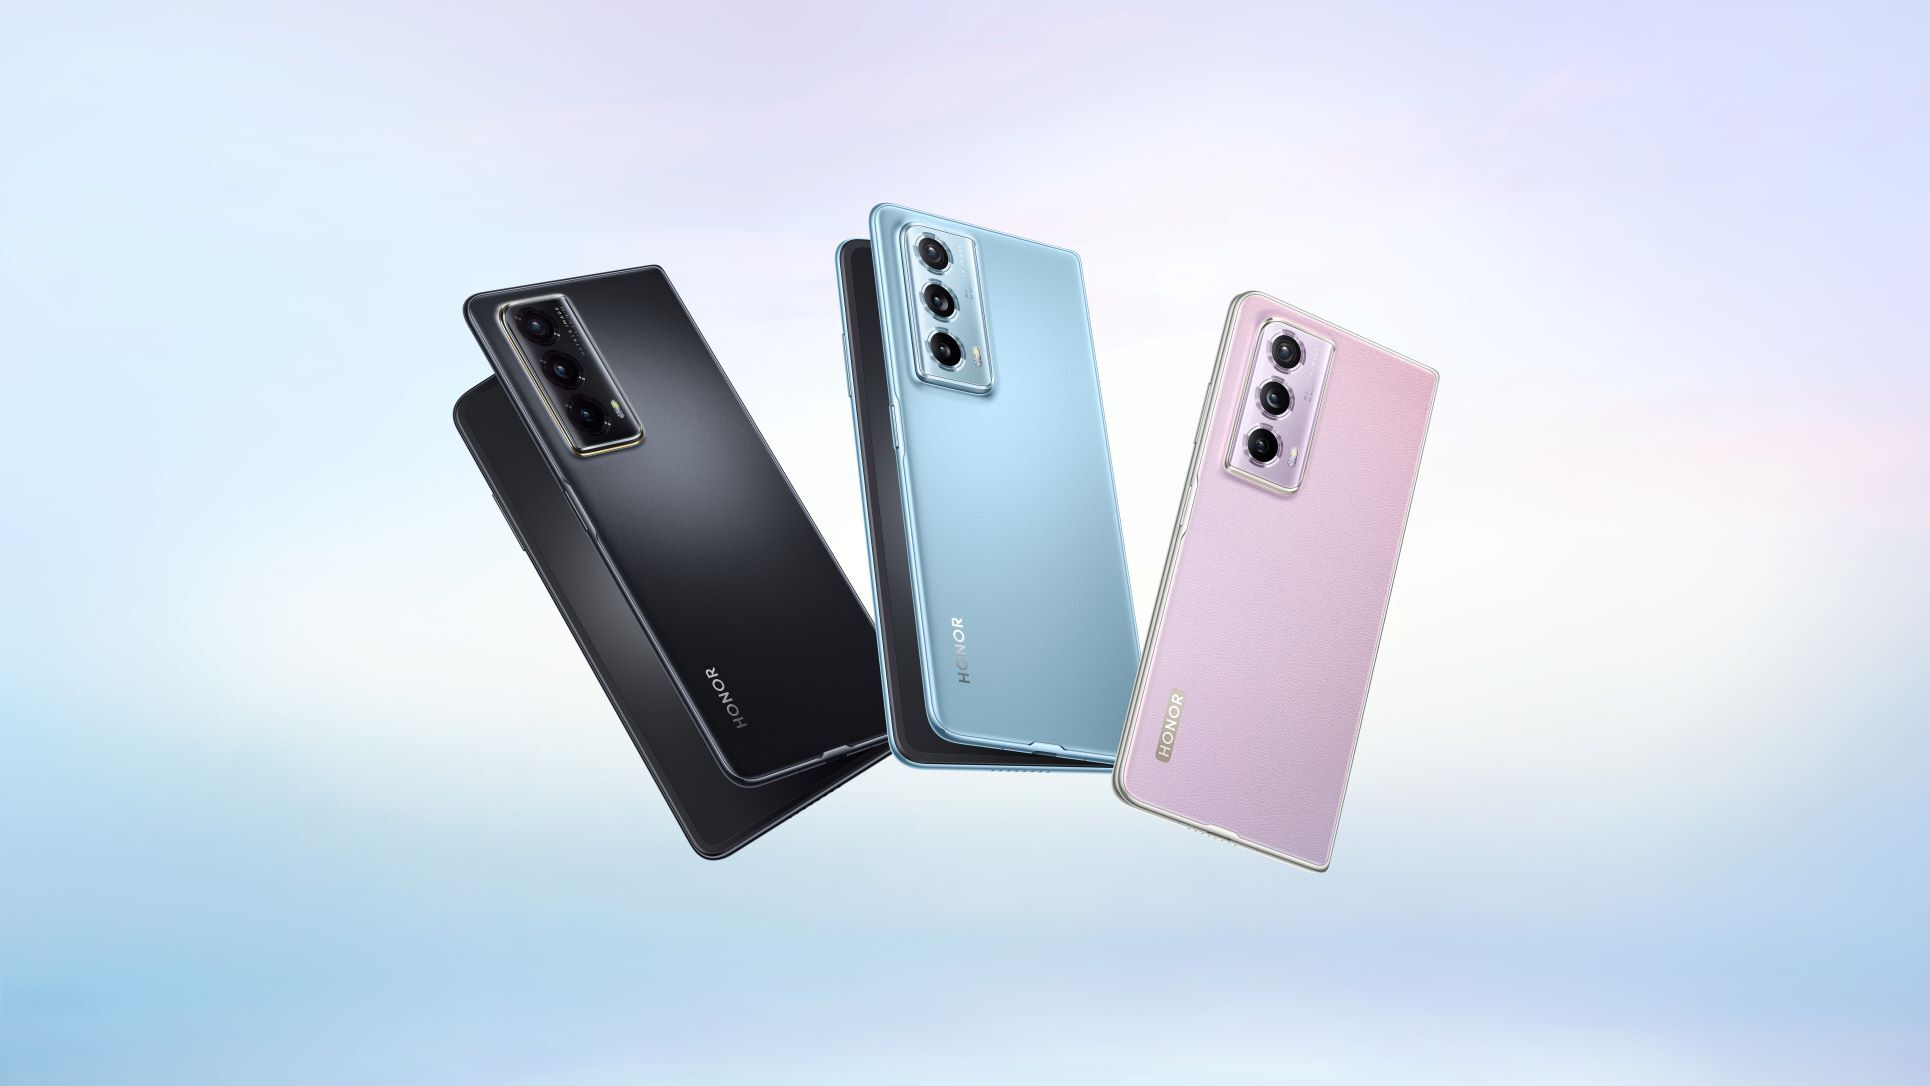 The Honor Magic Vs2 in&amp;nbsp;Midnight Black, Violet Coral, and Glacier Blue - The Honor Magic Vs2 uses a 3D-printed hinge and an aerospace-grade magnesium alloy body